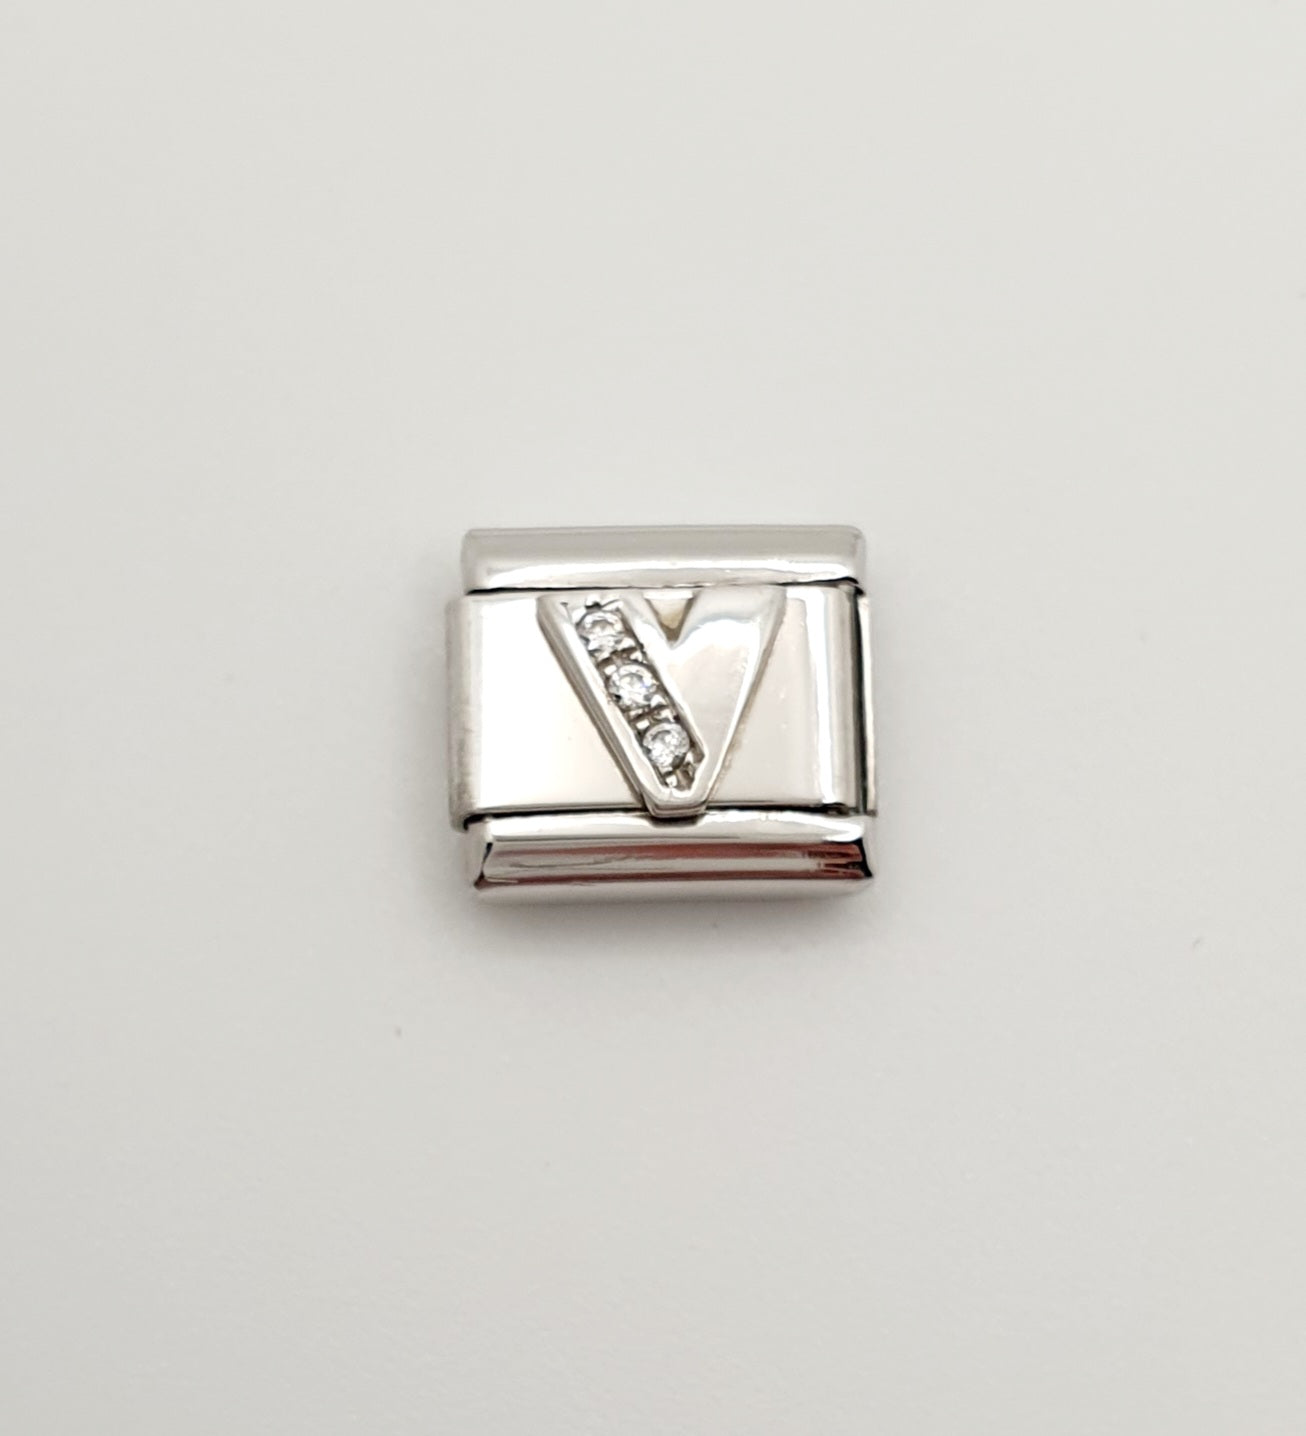 Nomination Charm Link "V" Stainless Steel with CZ's & 925 Silver, 330301 22